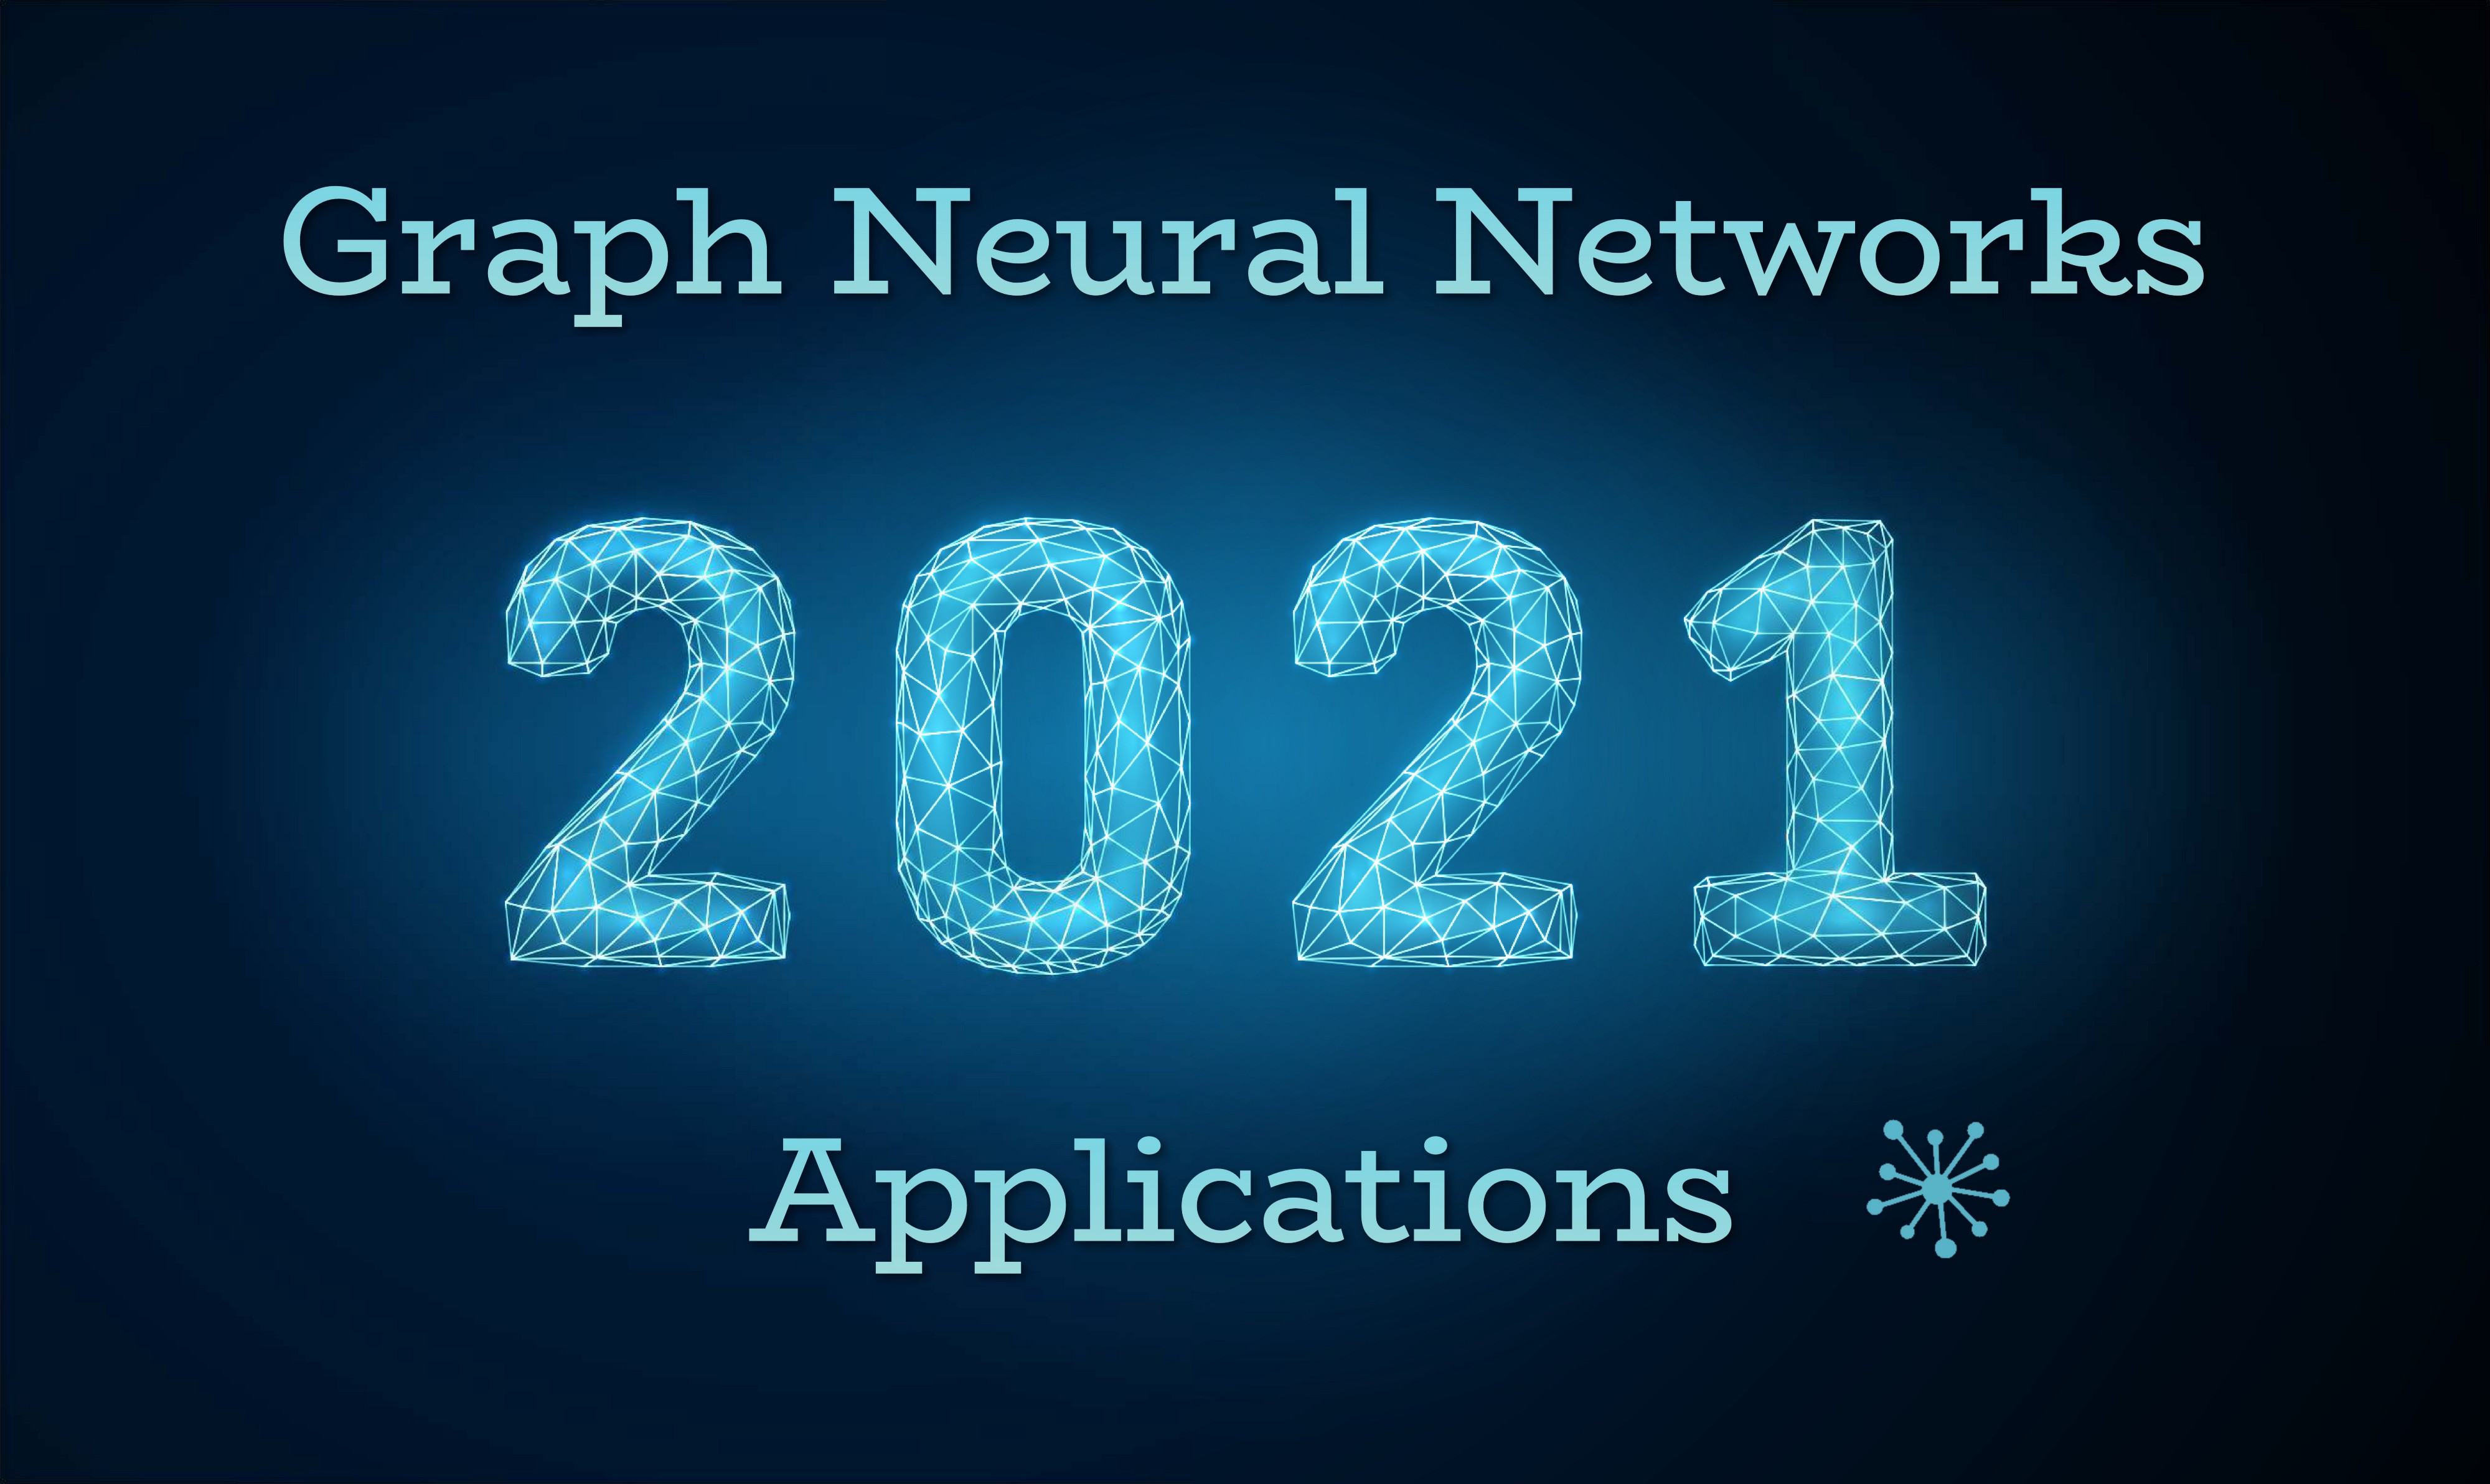 Are you ready?  Top 5 application hotspots of GNN graph neural network in 2021